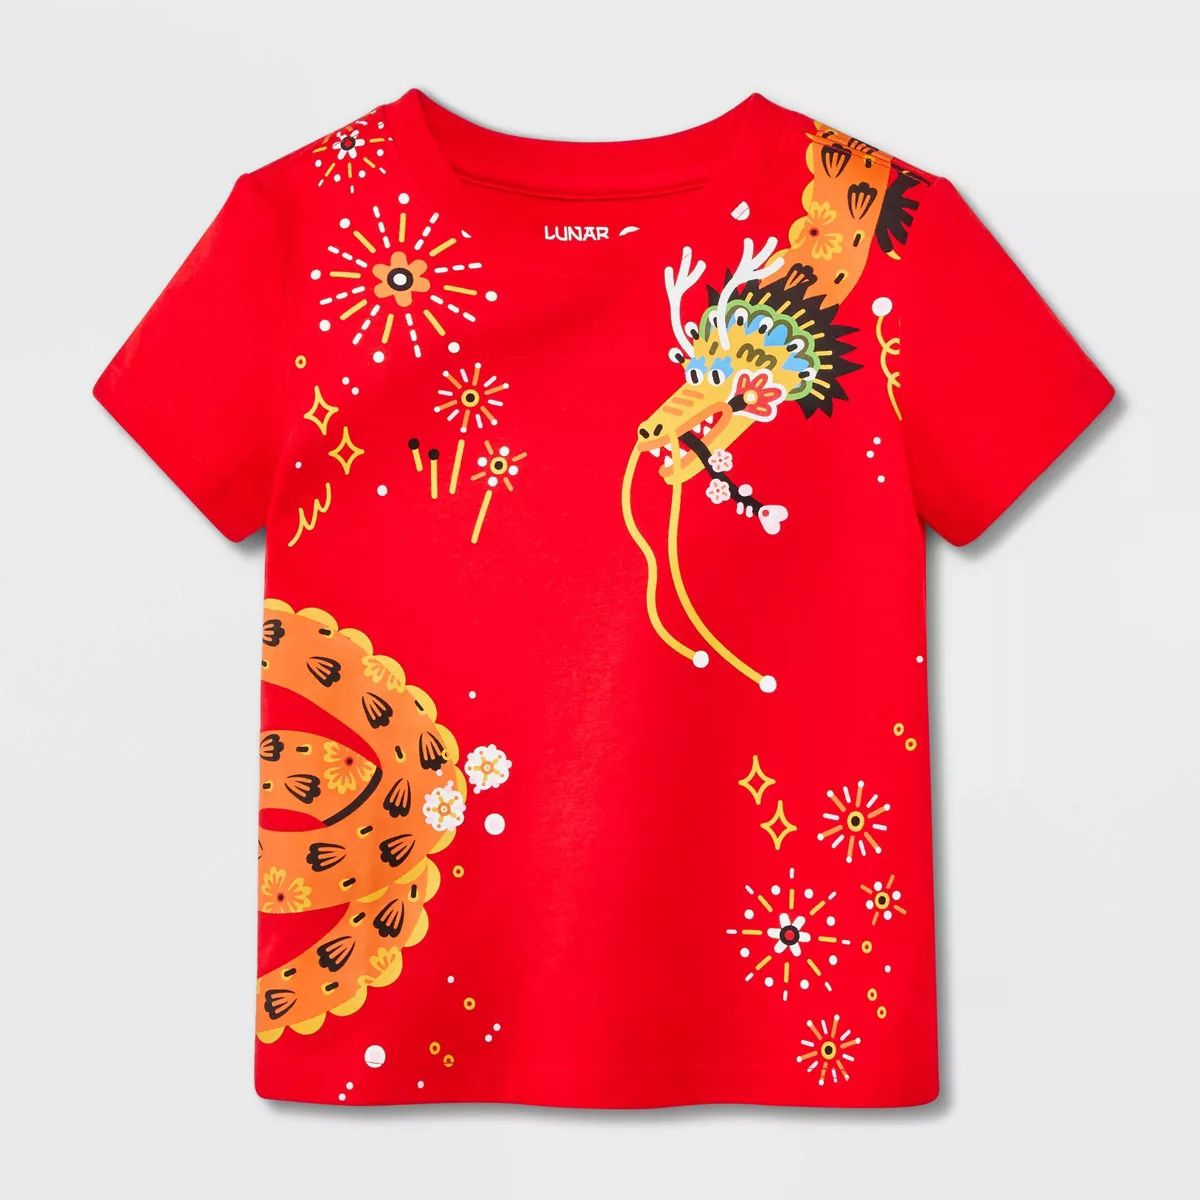 Lunar New Year Toddler Short Sleeve 'Year of the Dragon' T-Shirt - Red | Target